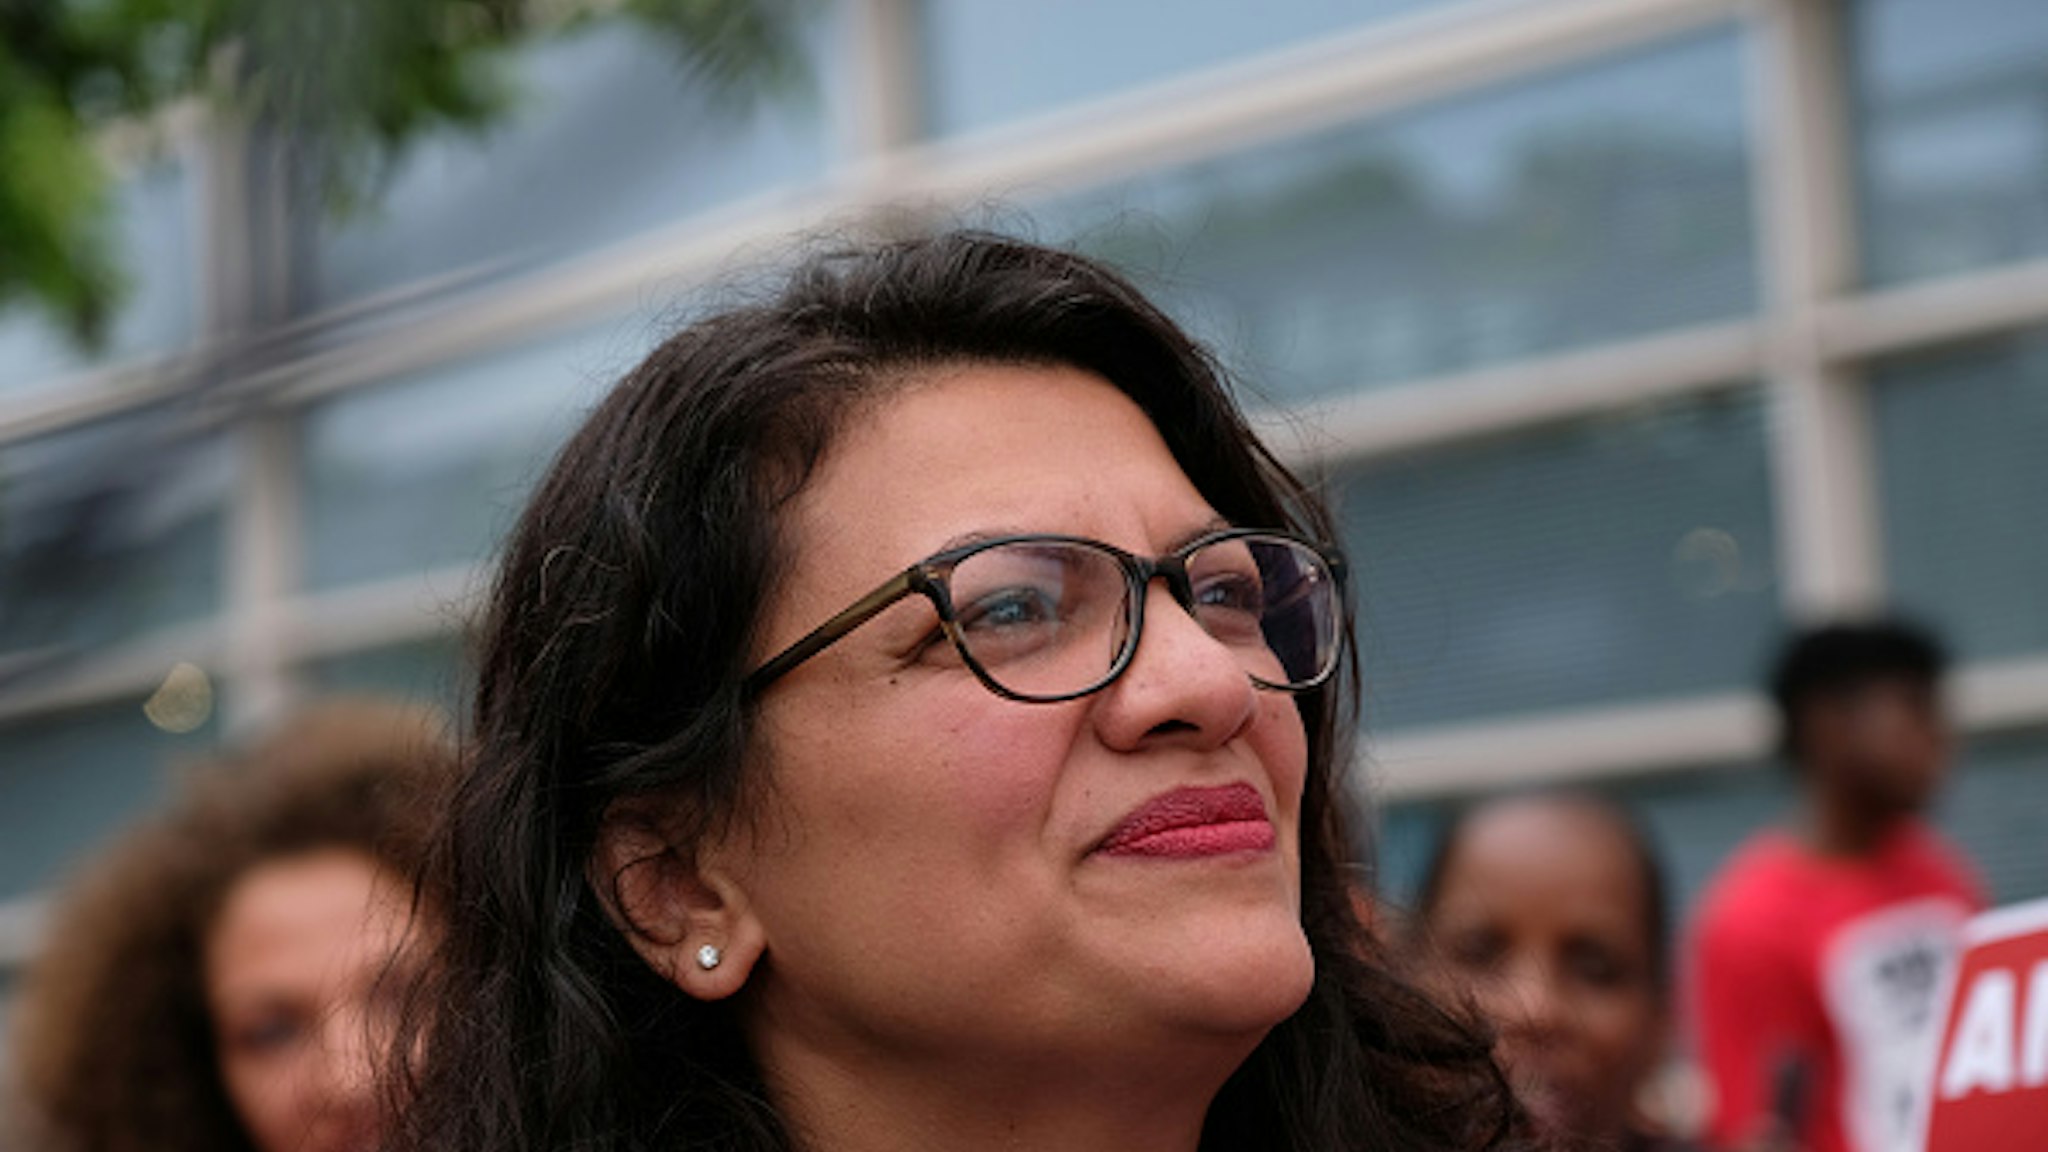 Representative Rashida Tlaib, a Democrat from Michigan, attends a rally with striking airline food workers at Reagan National Airport in Arlington, Virginia, U.S., on Tuesday, July 23, 2019.